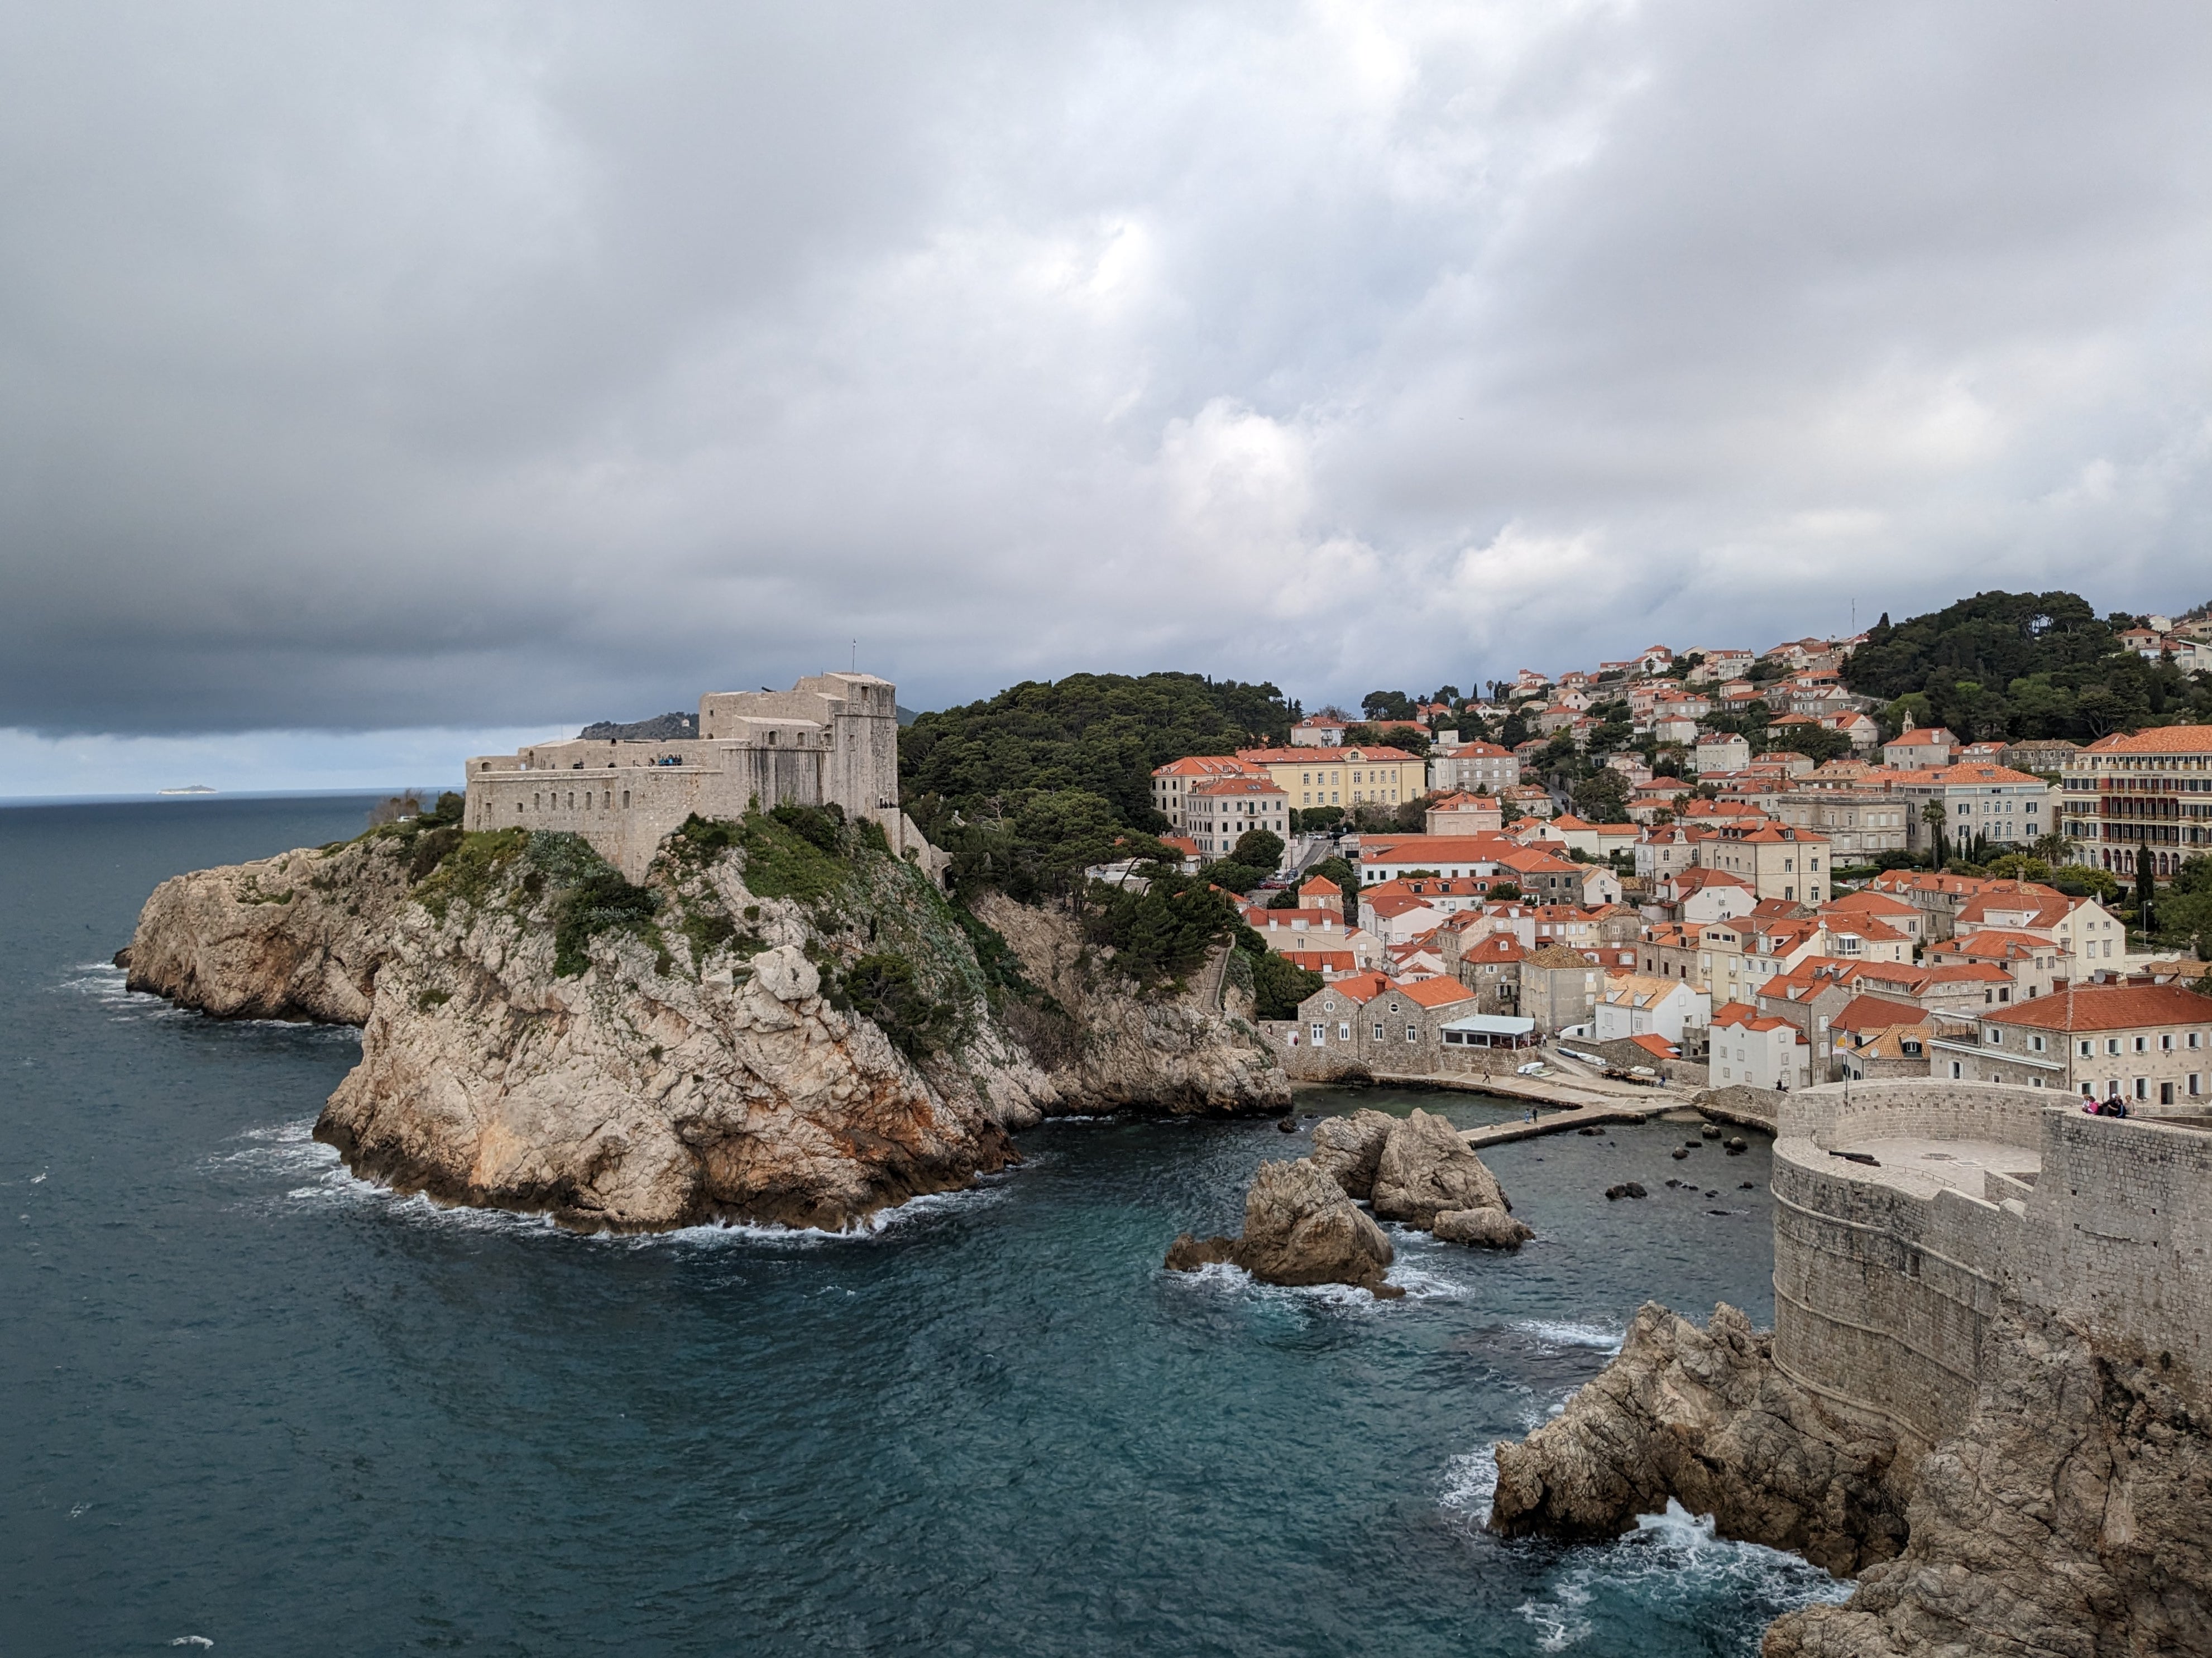 Spring brings clouds but not crowds to Dubrovnik